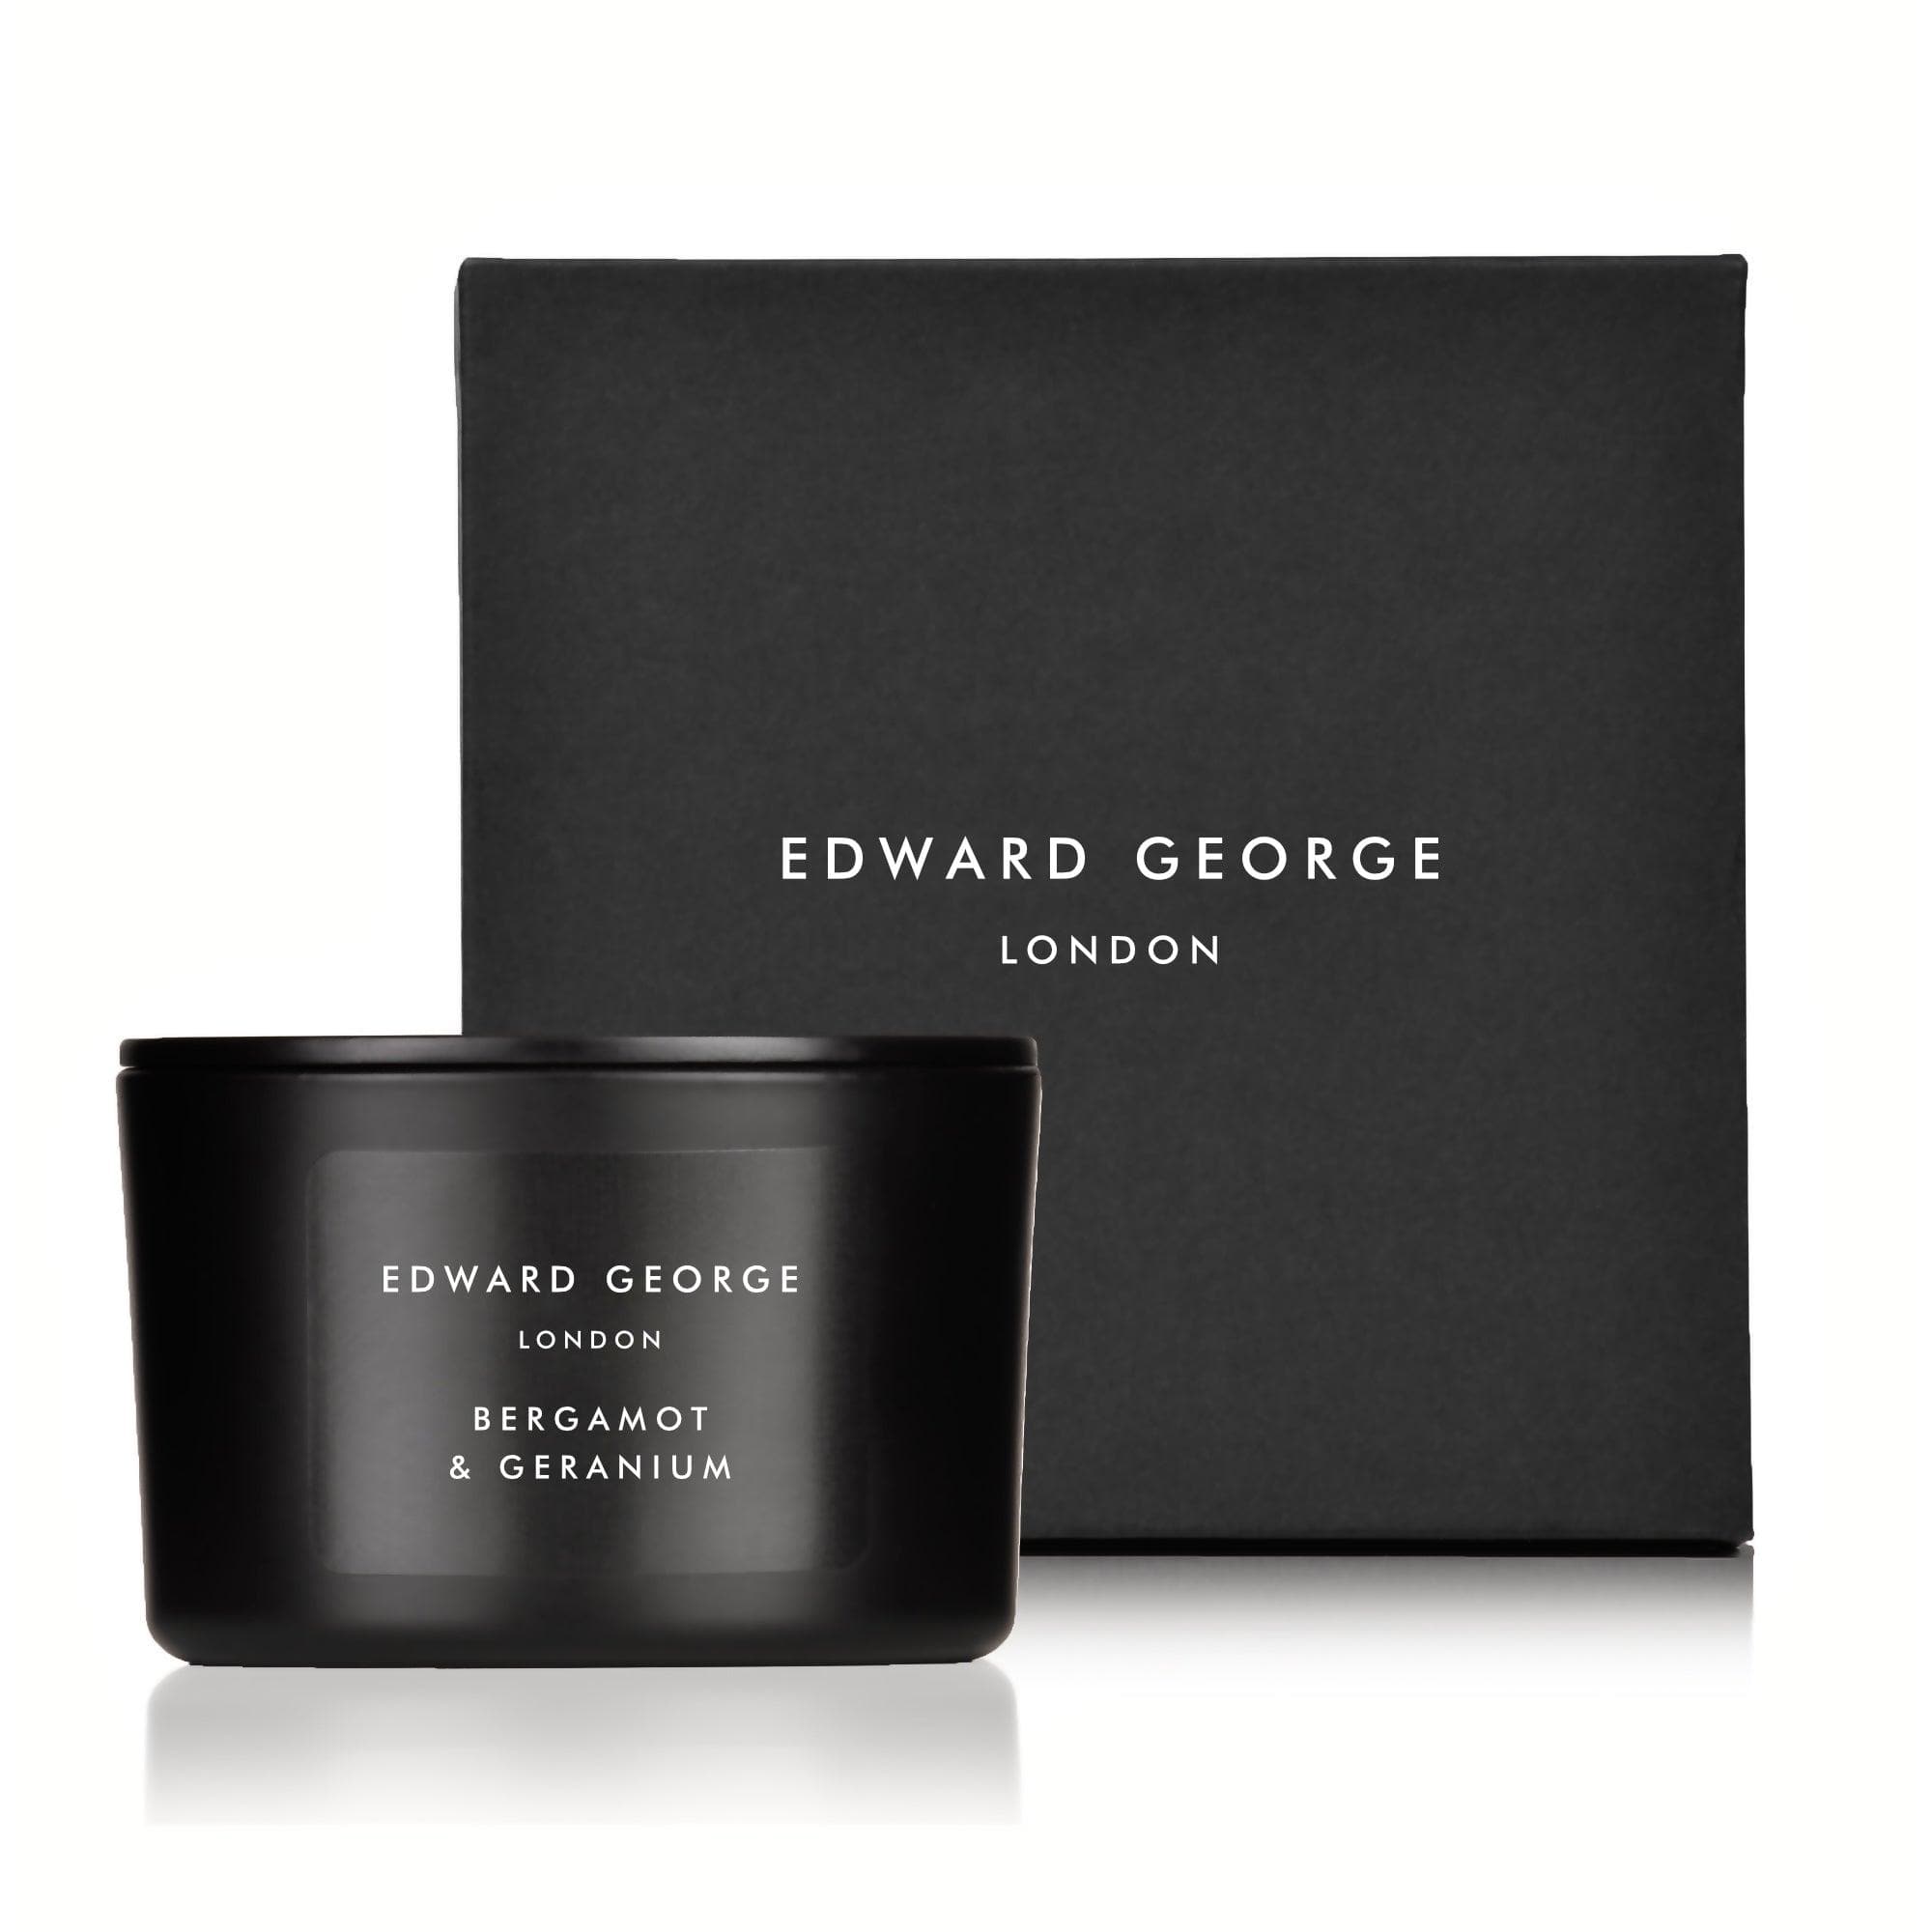 bergamot geranium candles home fragrance decor room edward george london luxury gift ritual scent set lid zinc alloy black wax beeswax mineral best black wax scented candle women men small